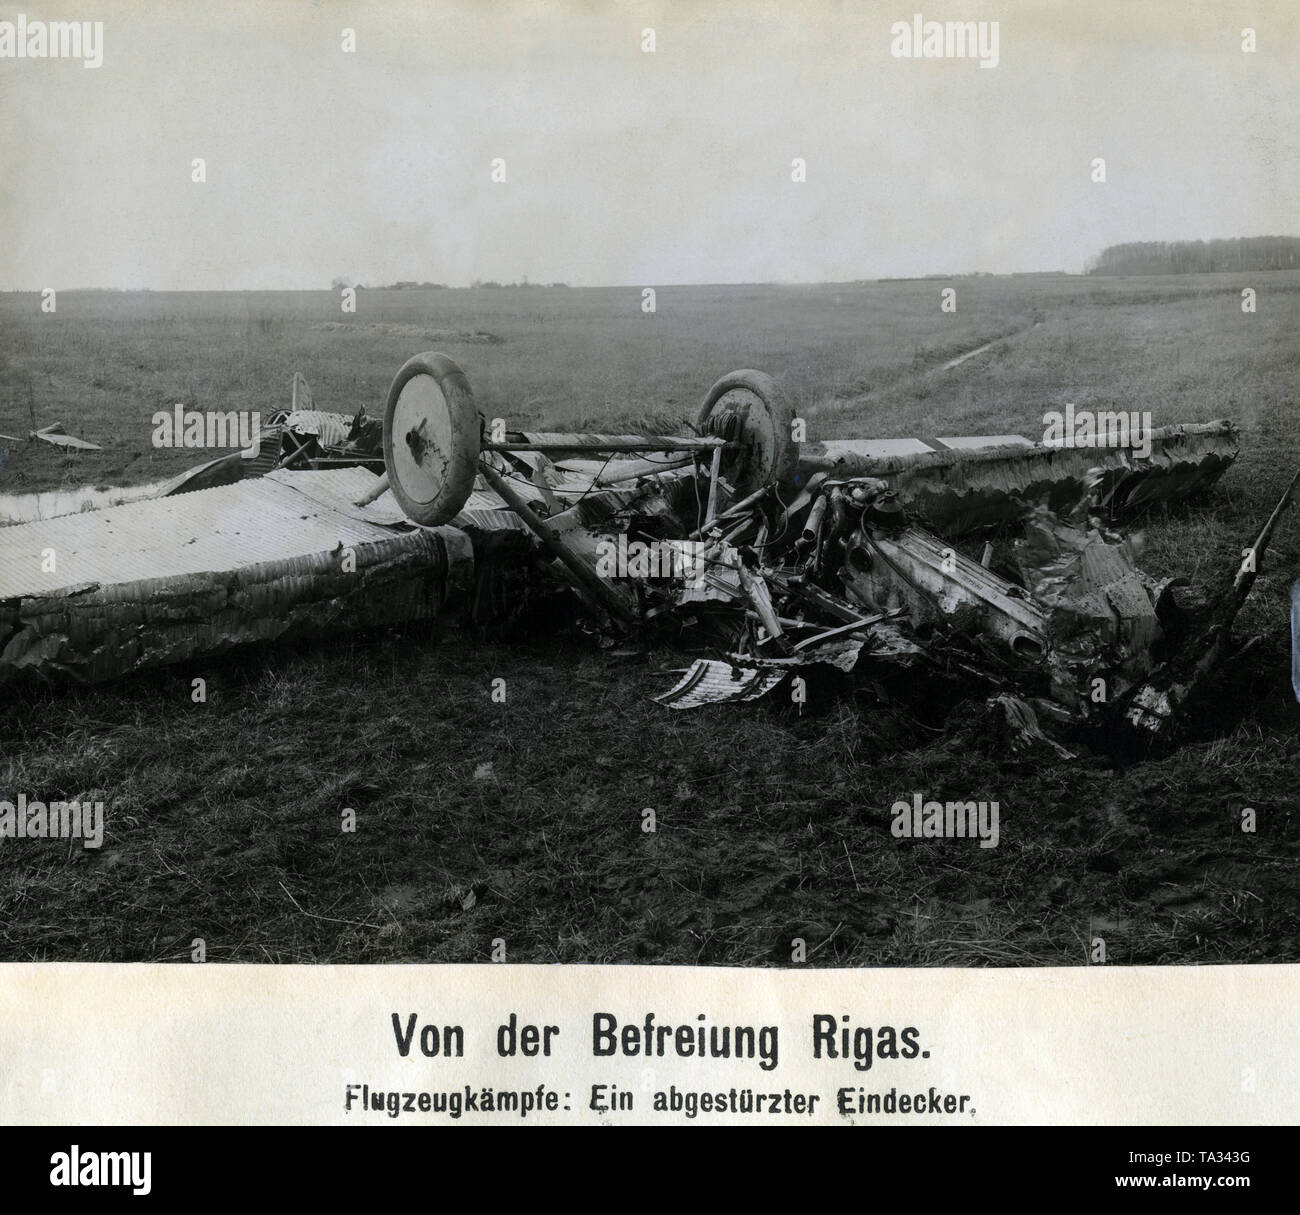 A monoplane crashed during the conquest of Riga by German-Baltic troops. Aerial battles were part of the most important battles in the Baltic Wars of Independence. Stock Photo